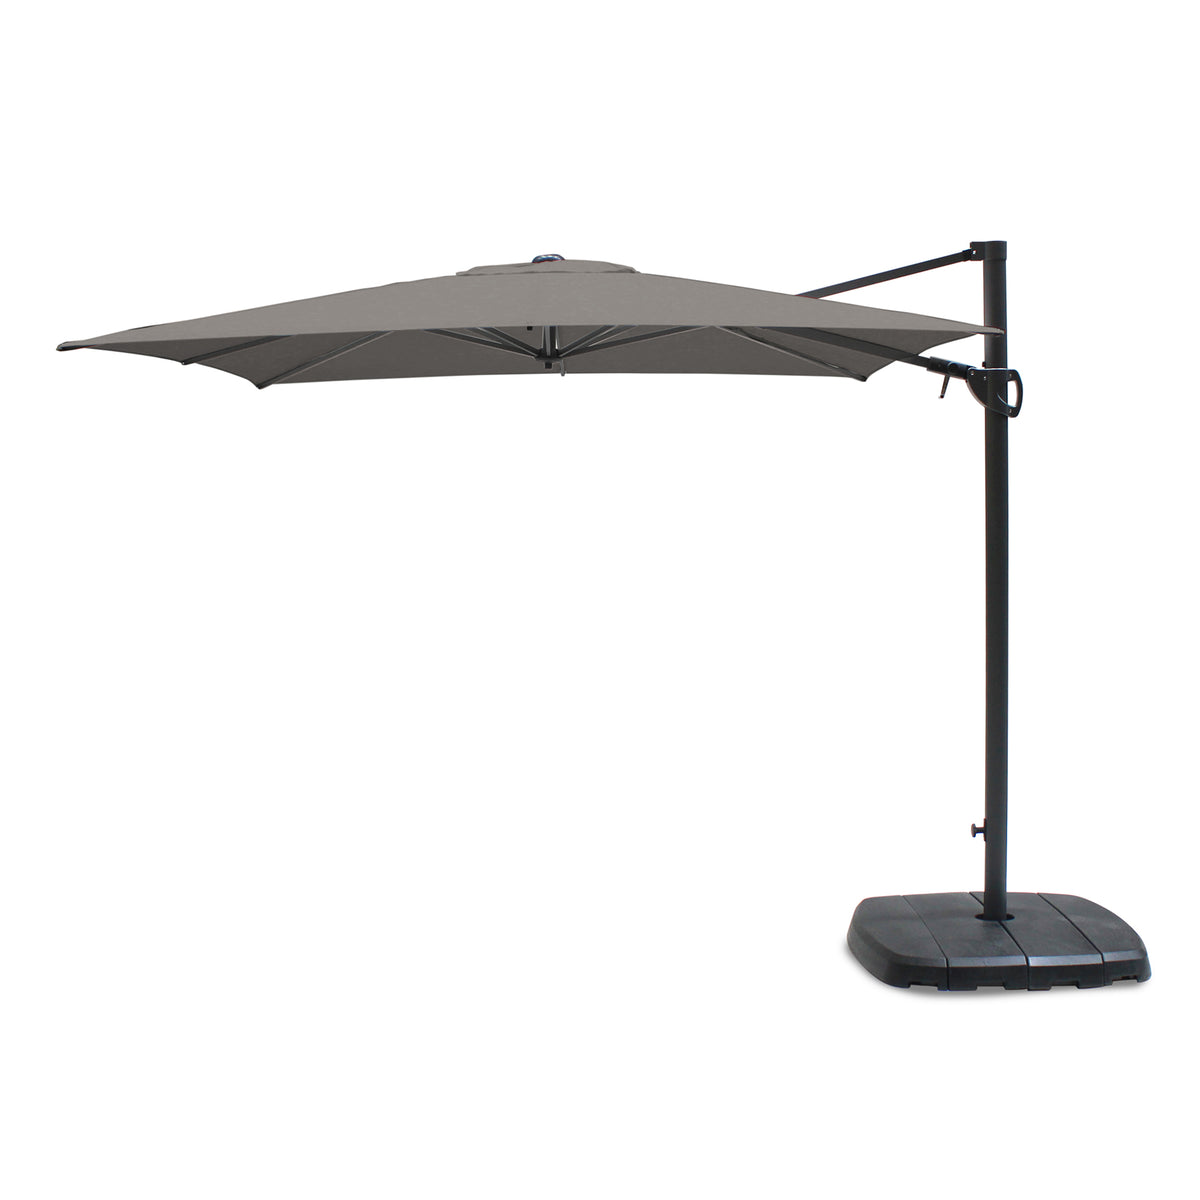 Kettler 2.5m Square Free Arm Cantilever Parasol with Base - Taupe